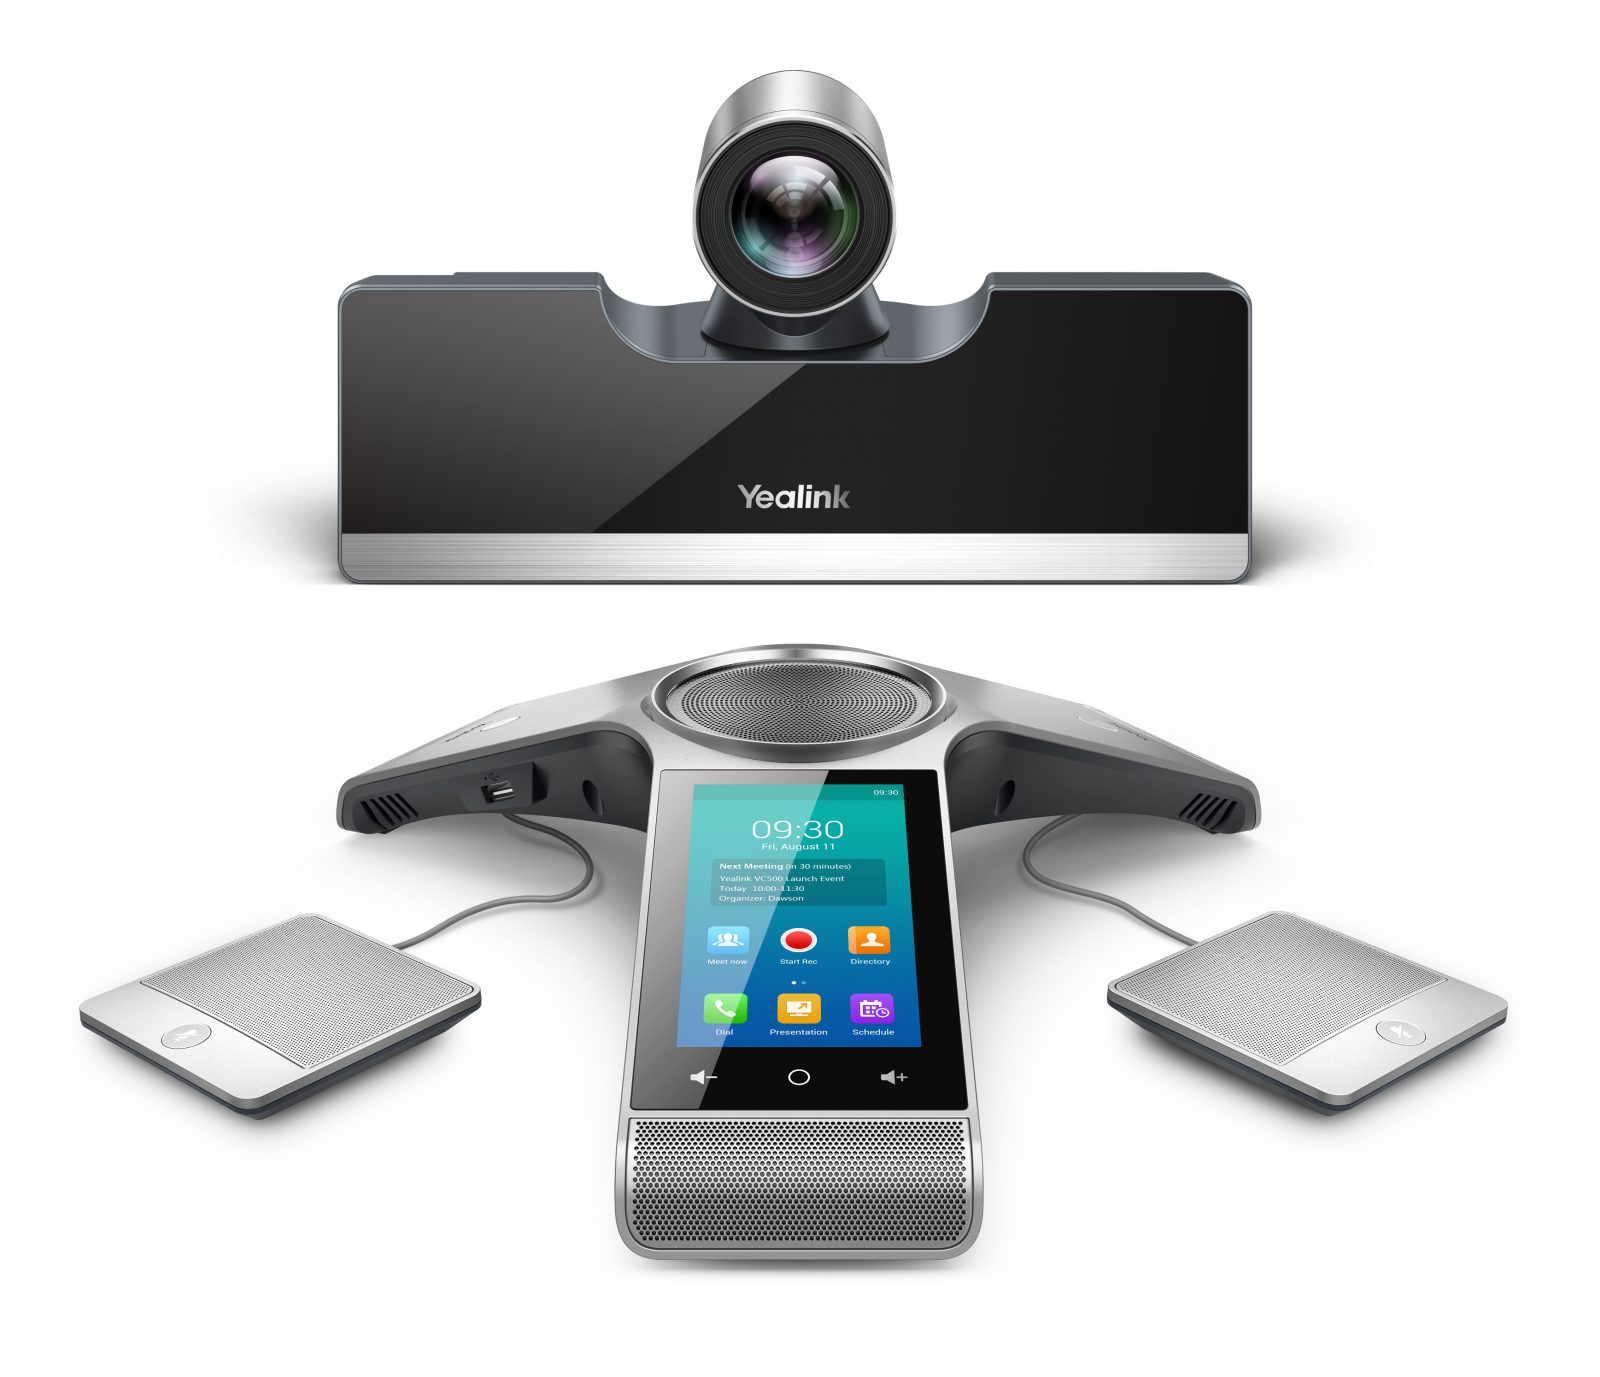 Yealink VC500 Video Conference System - Hong Kong & Macau customer, please call 852 39001988 for more information - Matrix Technology HK Ltd